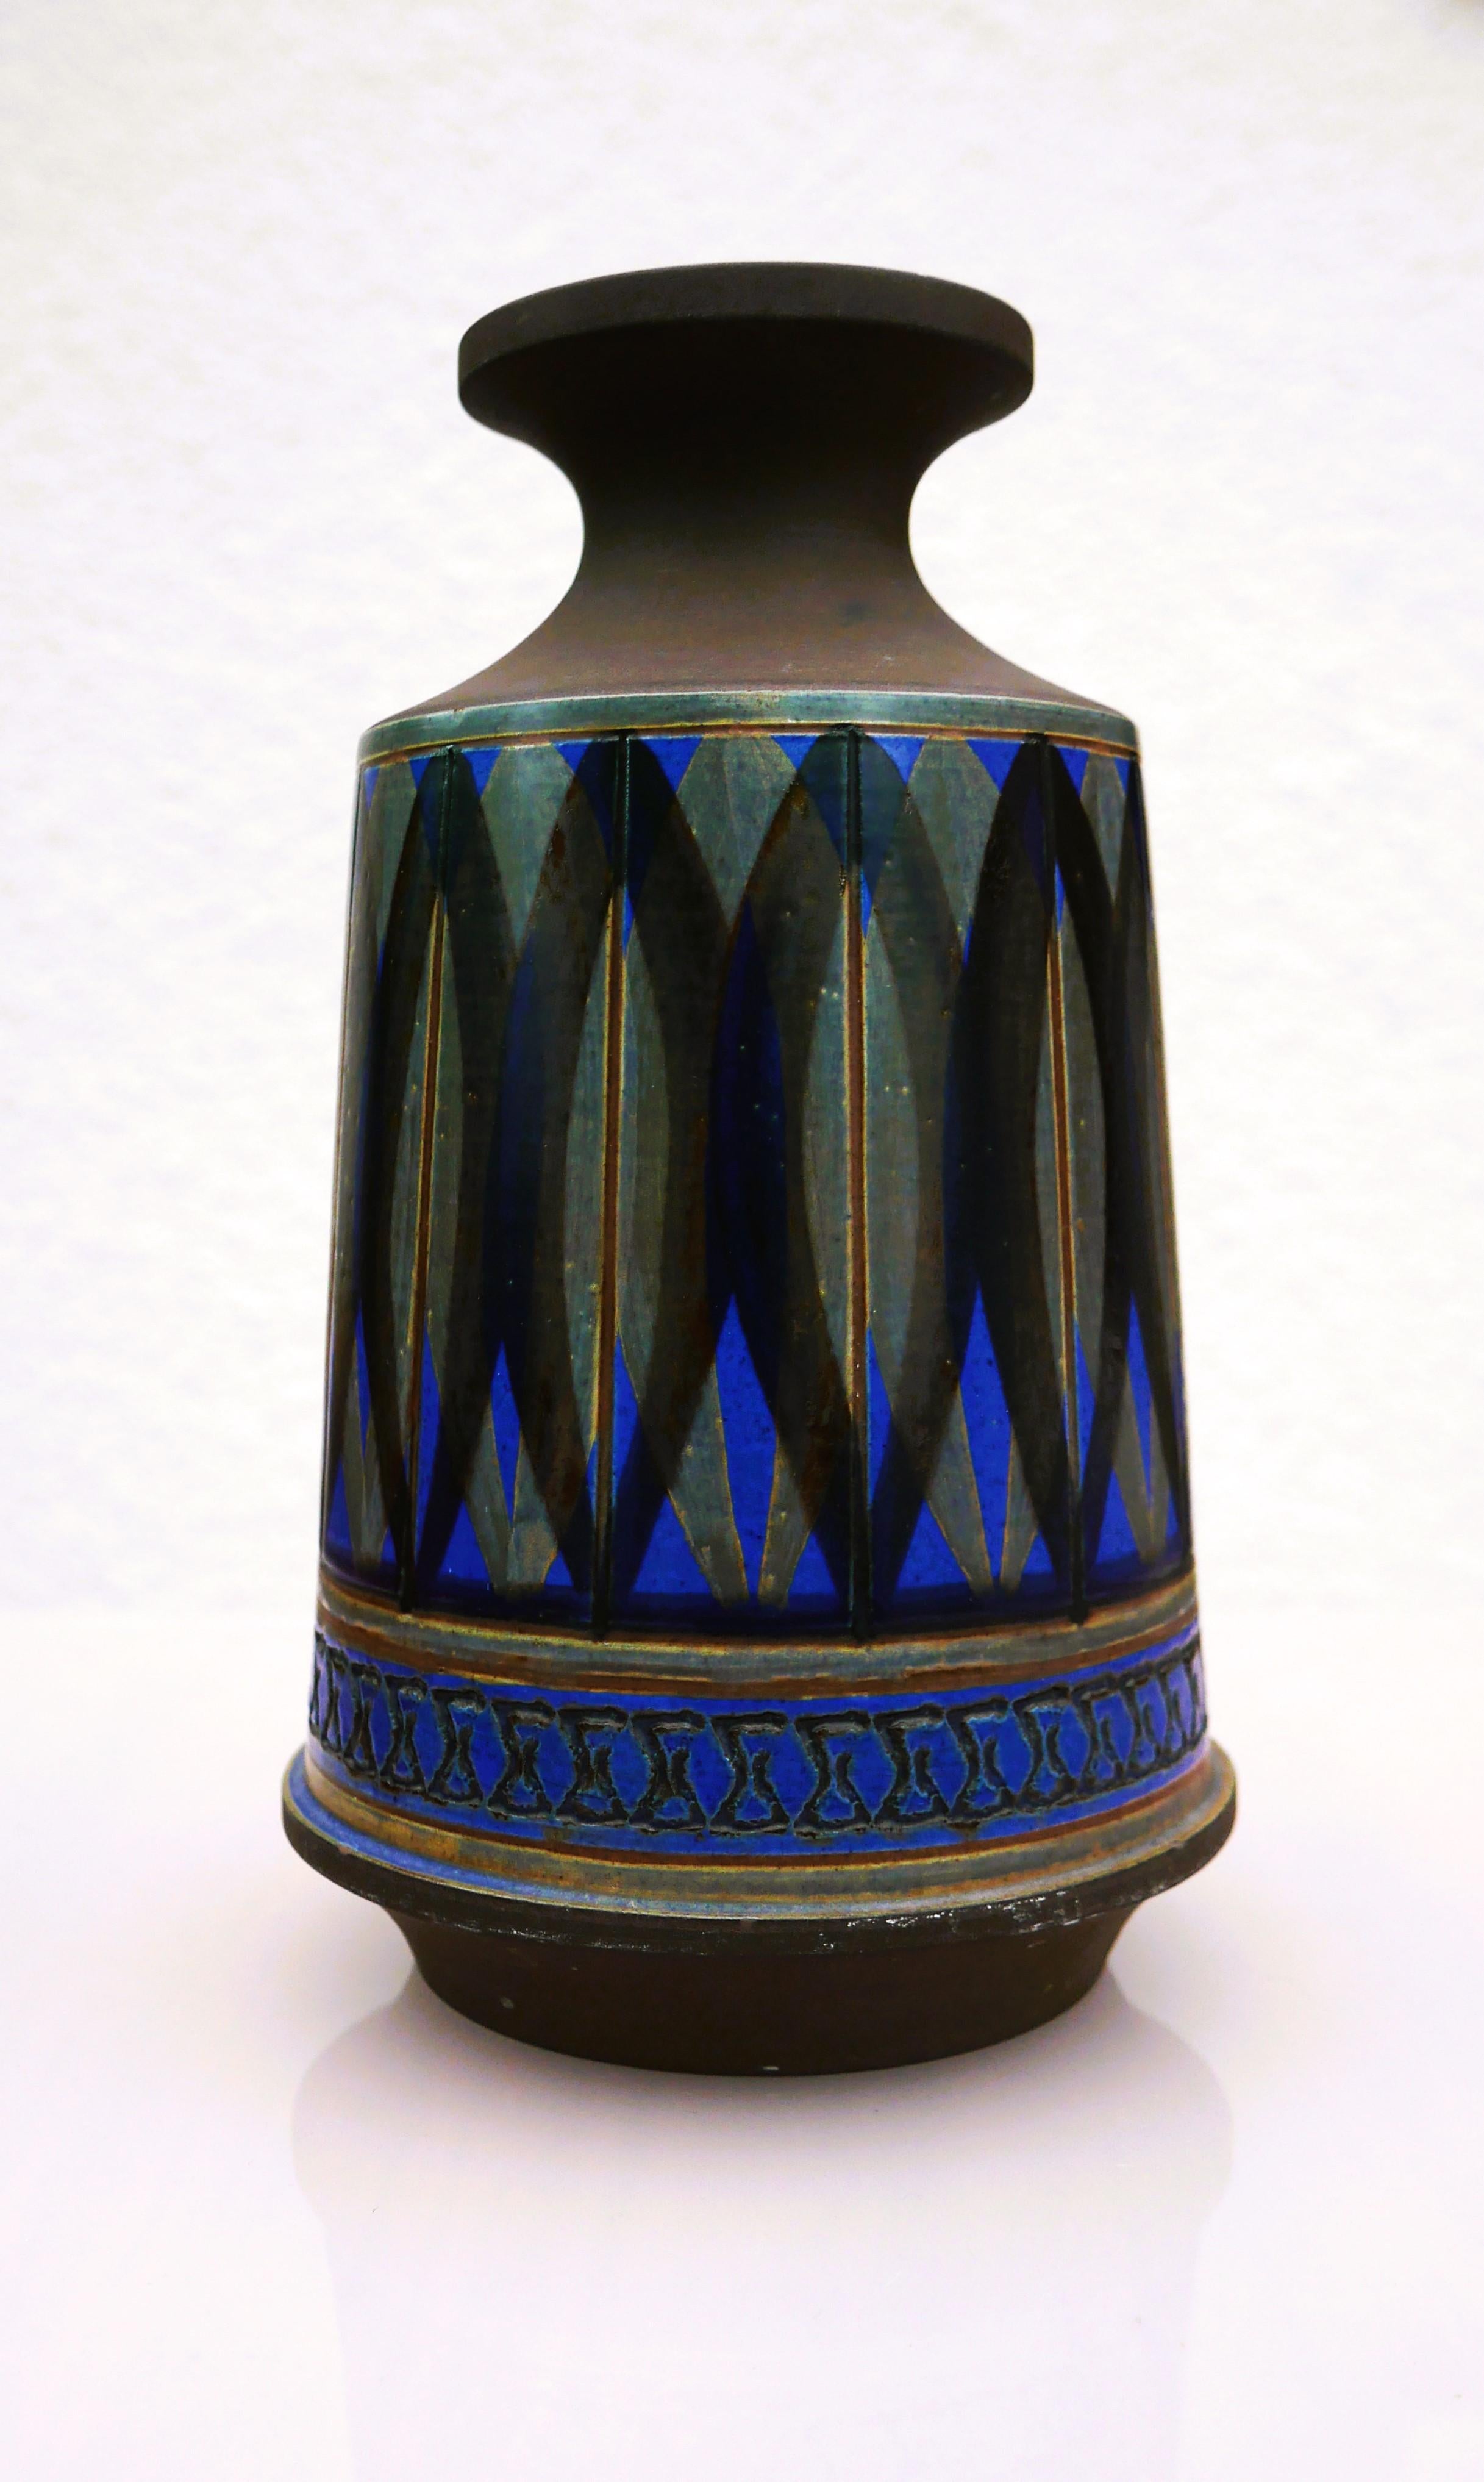 This is a stunning  stoneware vase from Alingsås keramik, Sweden. It is handmade by Ullah Winbladh and signed by her. The pattern and the glazing is just amazing and so typical of her work. The colors are pale green and  bright blue in various